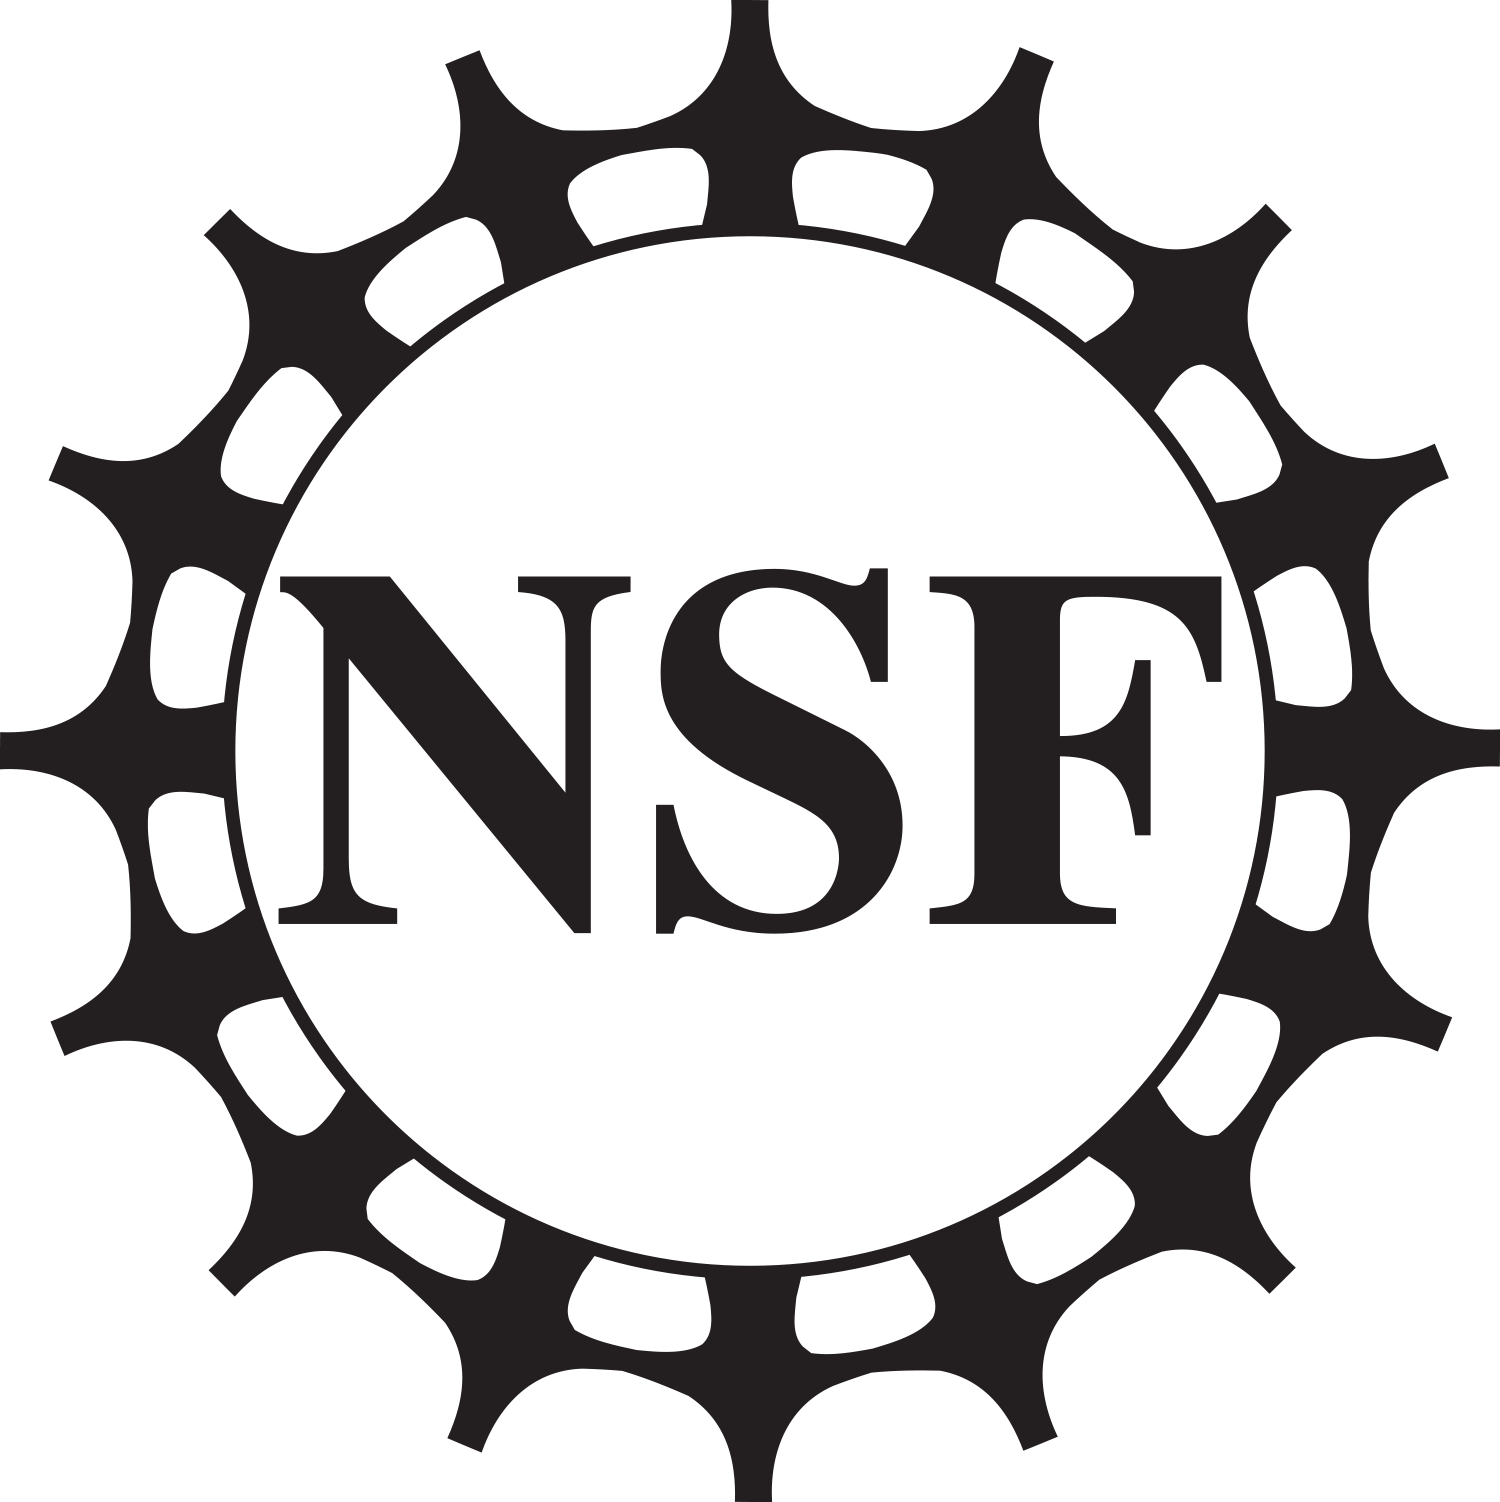 The National Science Foundation logo with the letters N S F inside a circle